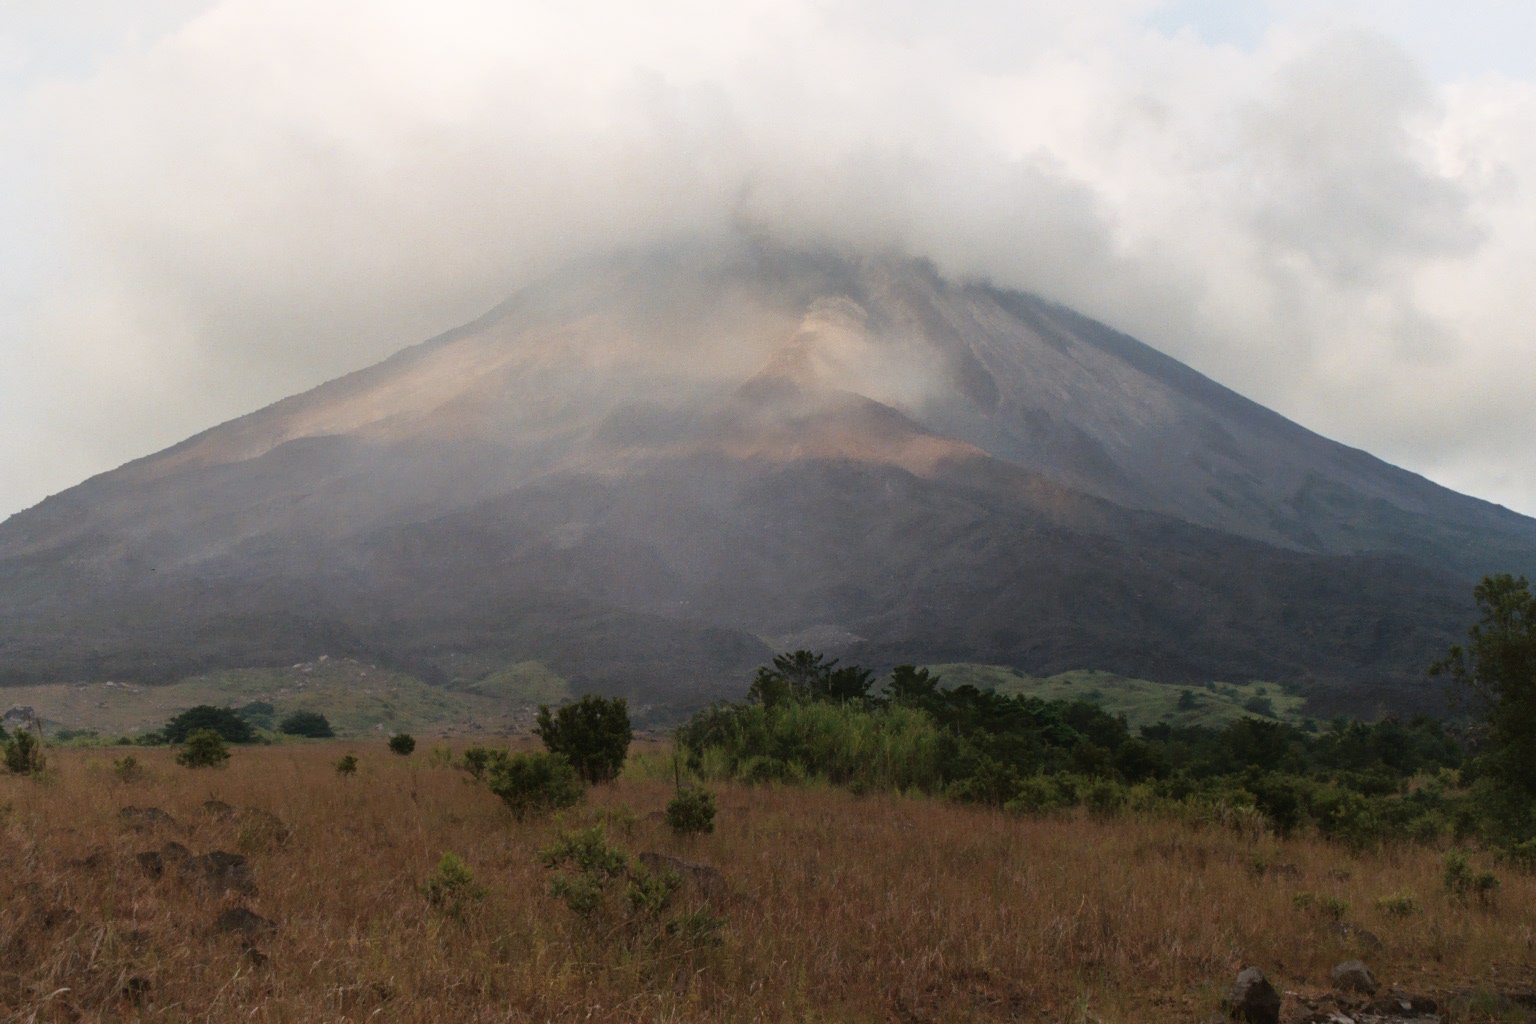 Volcano Arenal, Fortuna, Arenal